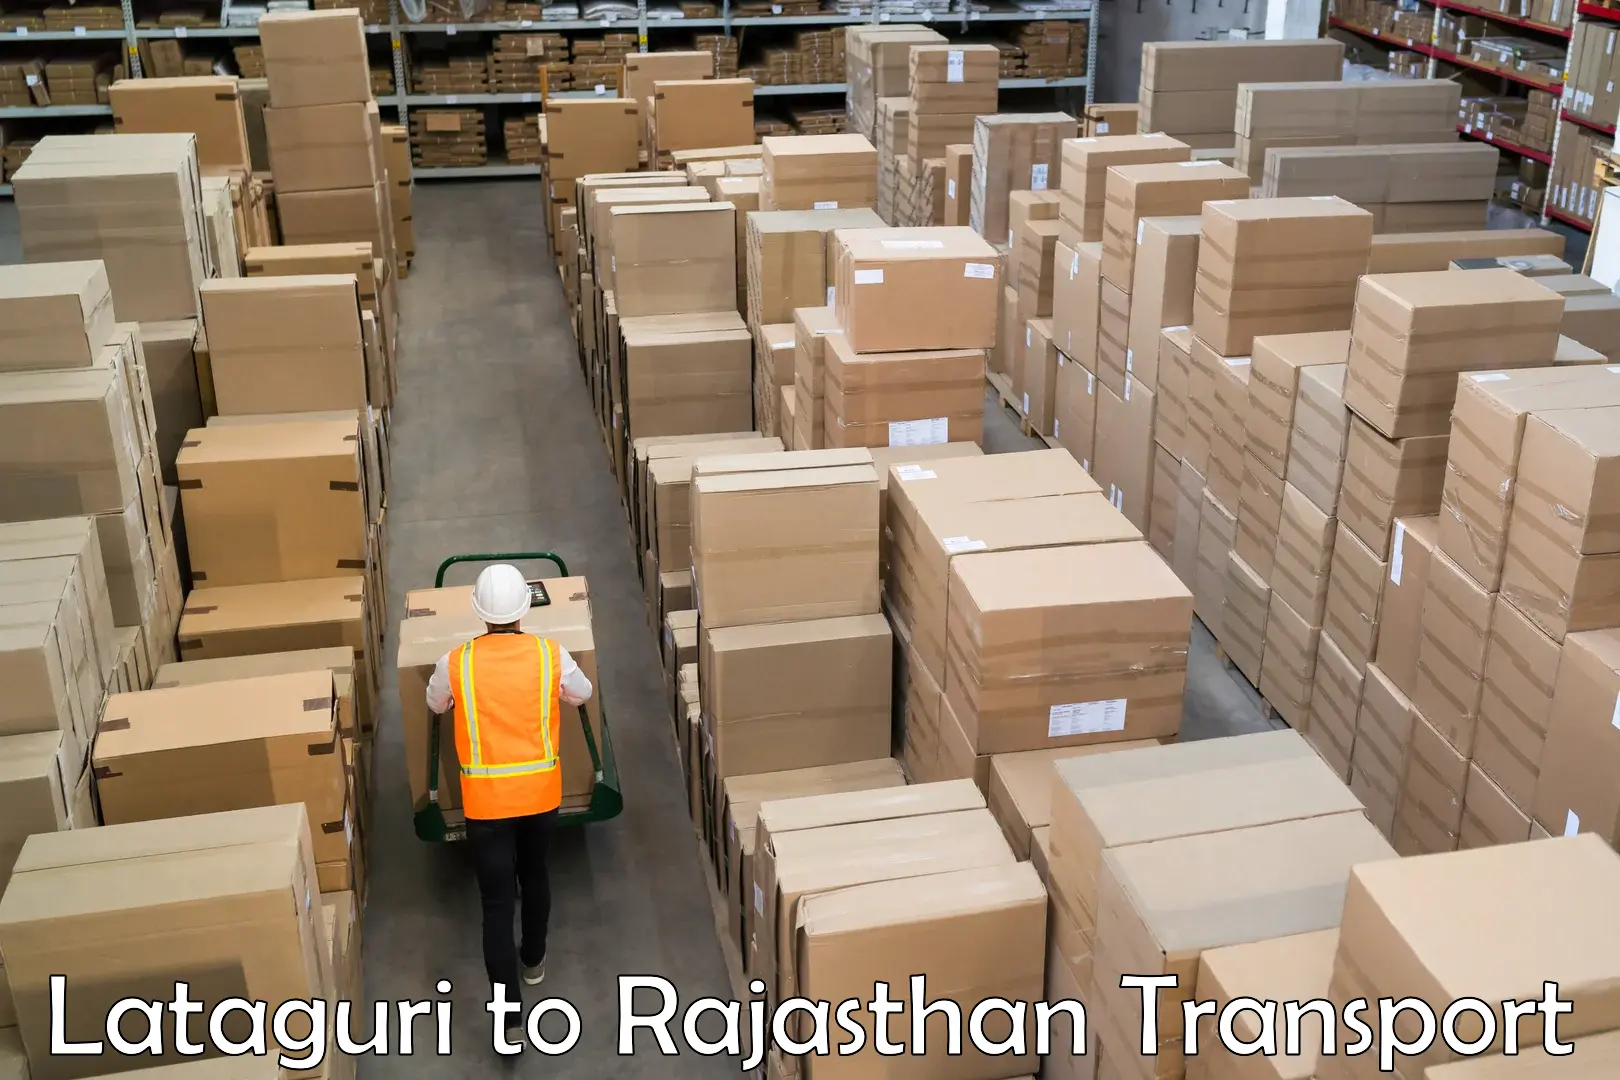 Container transport service Lataguri to Rajasthan